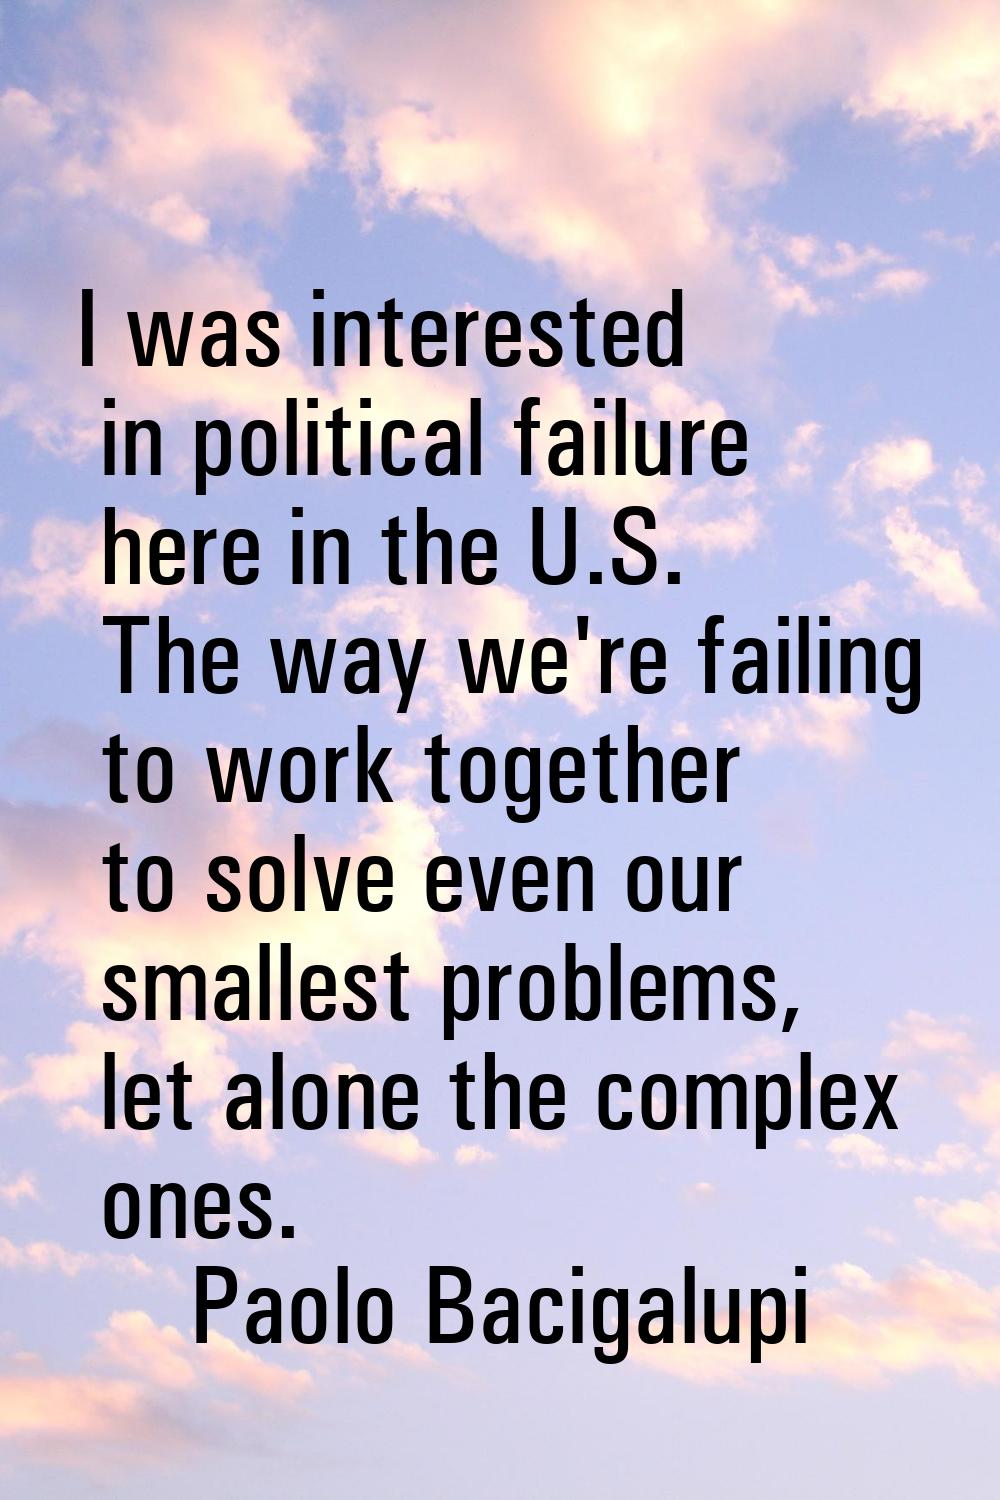 I was interested in political failure here in the U.S. The way we're failing to work together to so